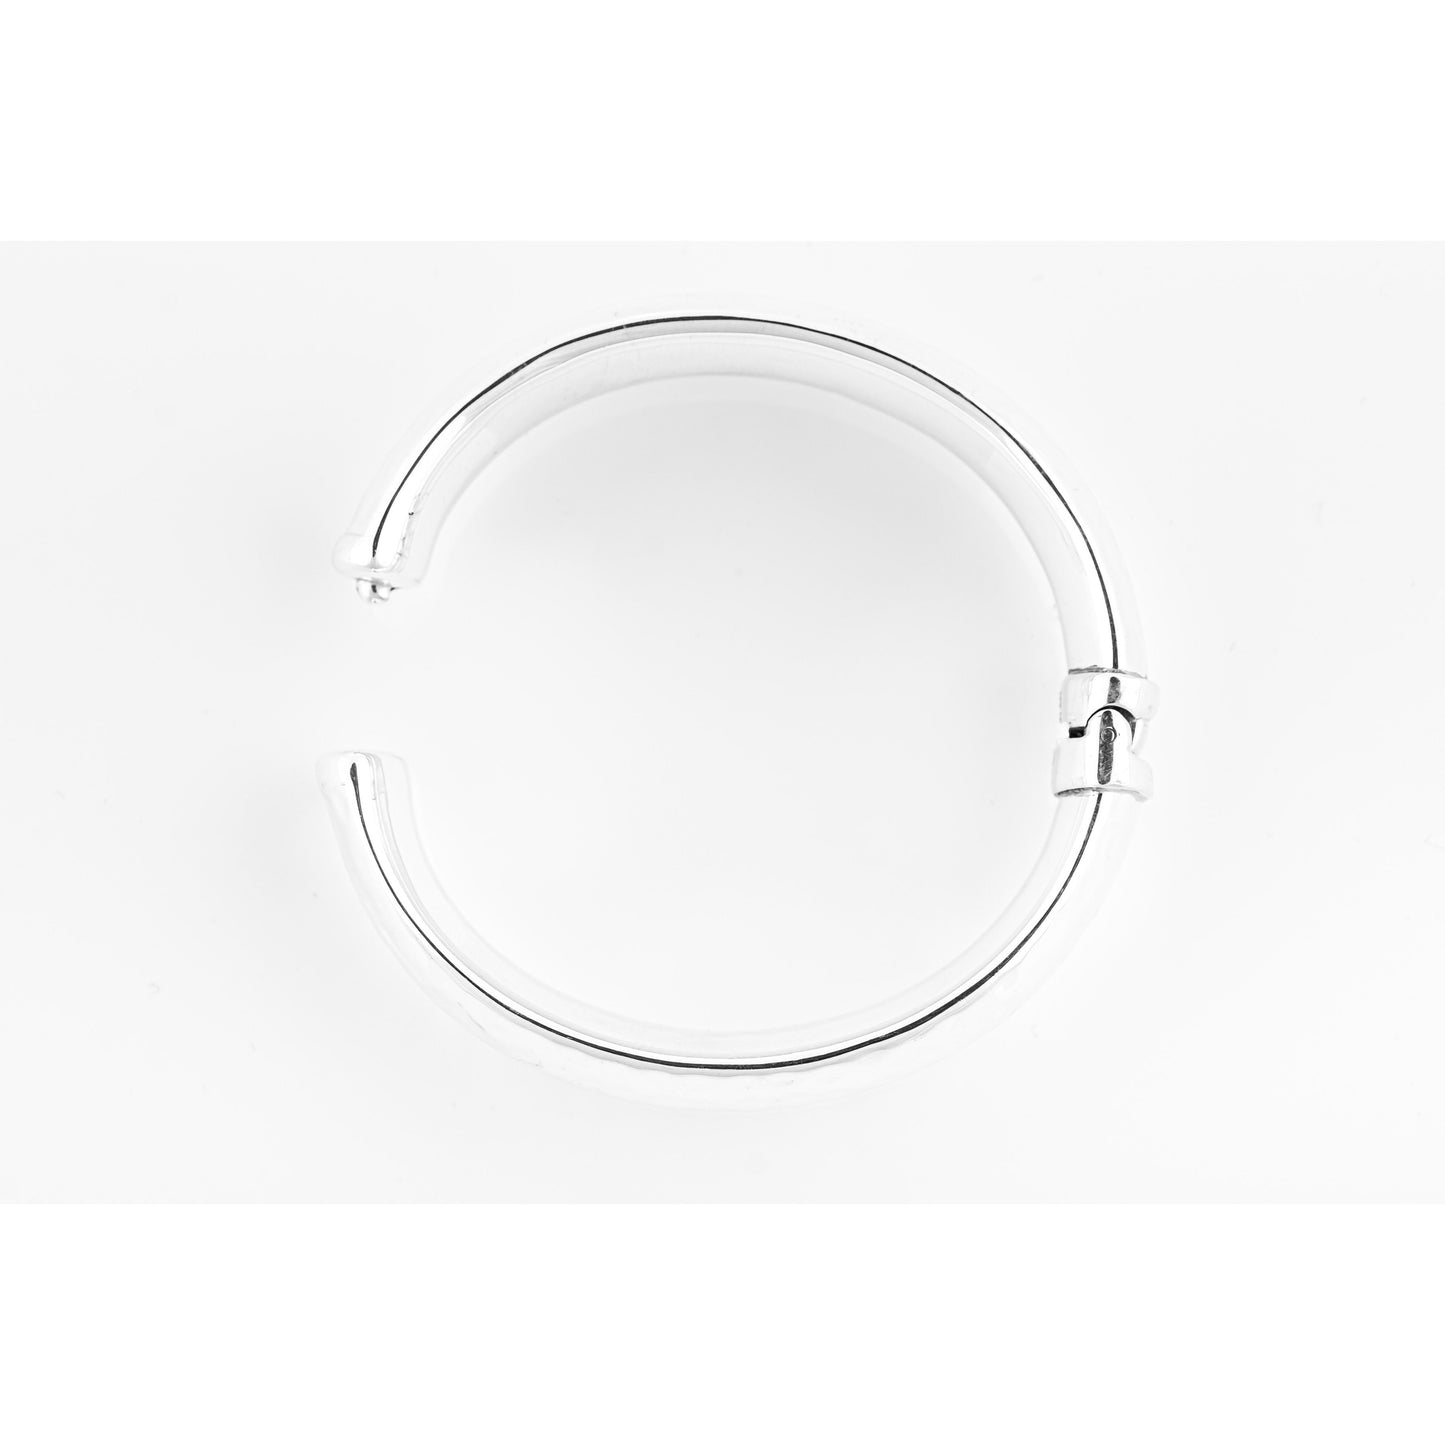 Silver circular object on white.